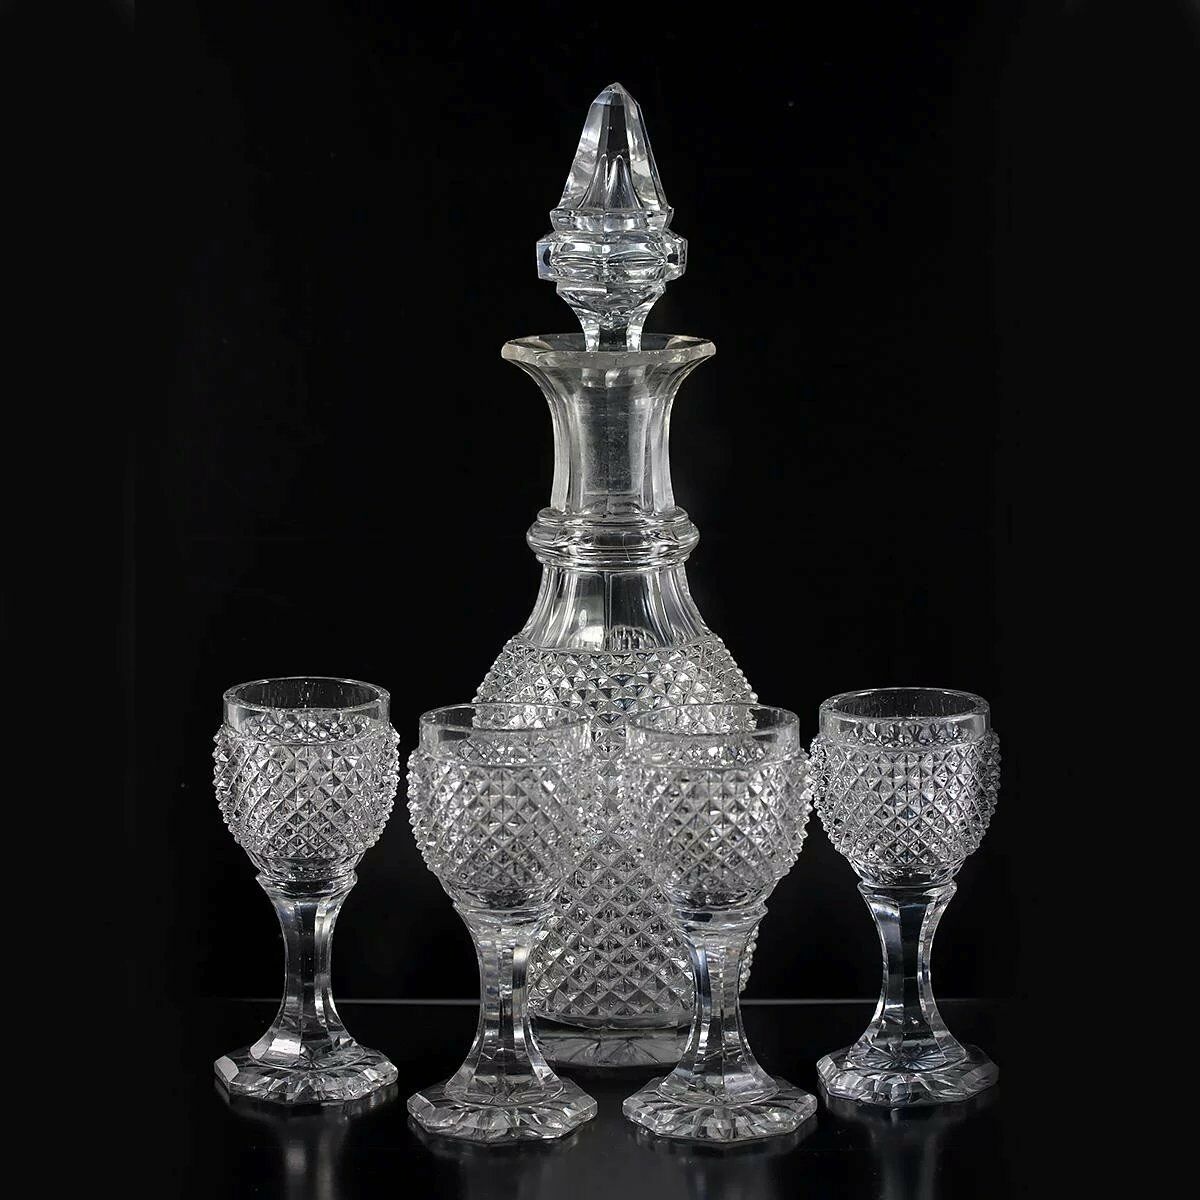 Antique French Baccarat 9.5" Decanter, 4 Cordial Goblets, c1830 Diam Cut Crystal